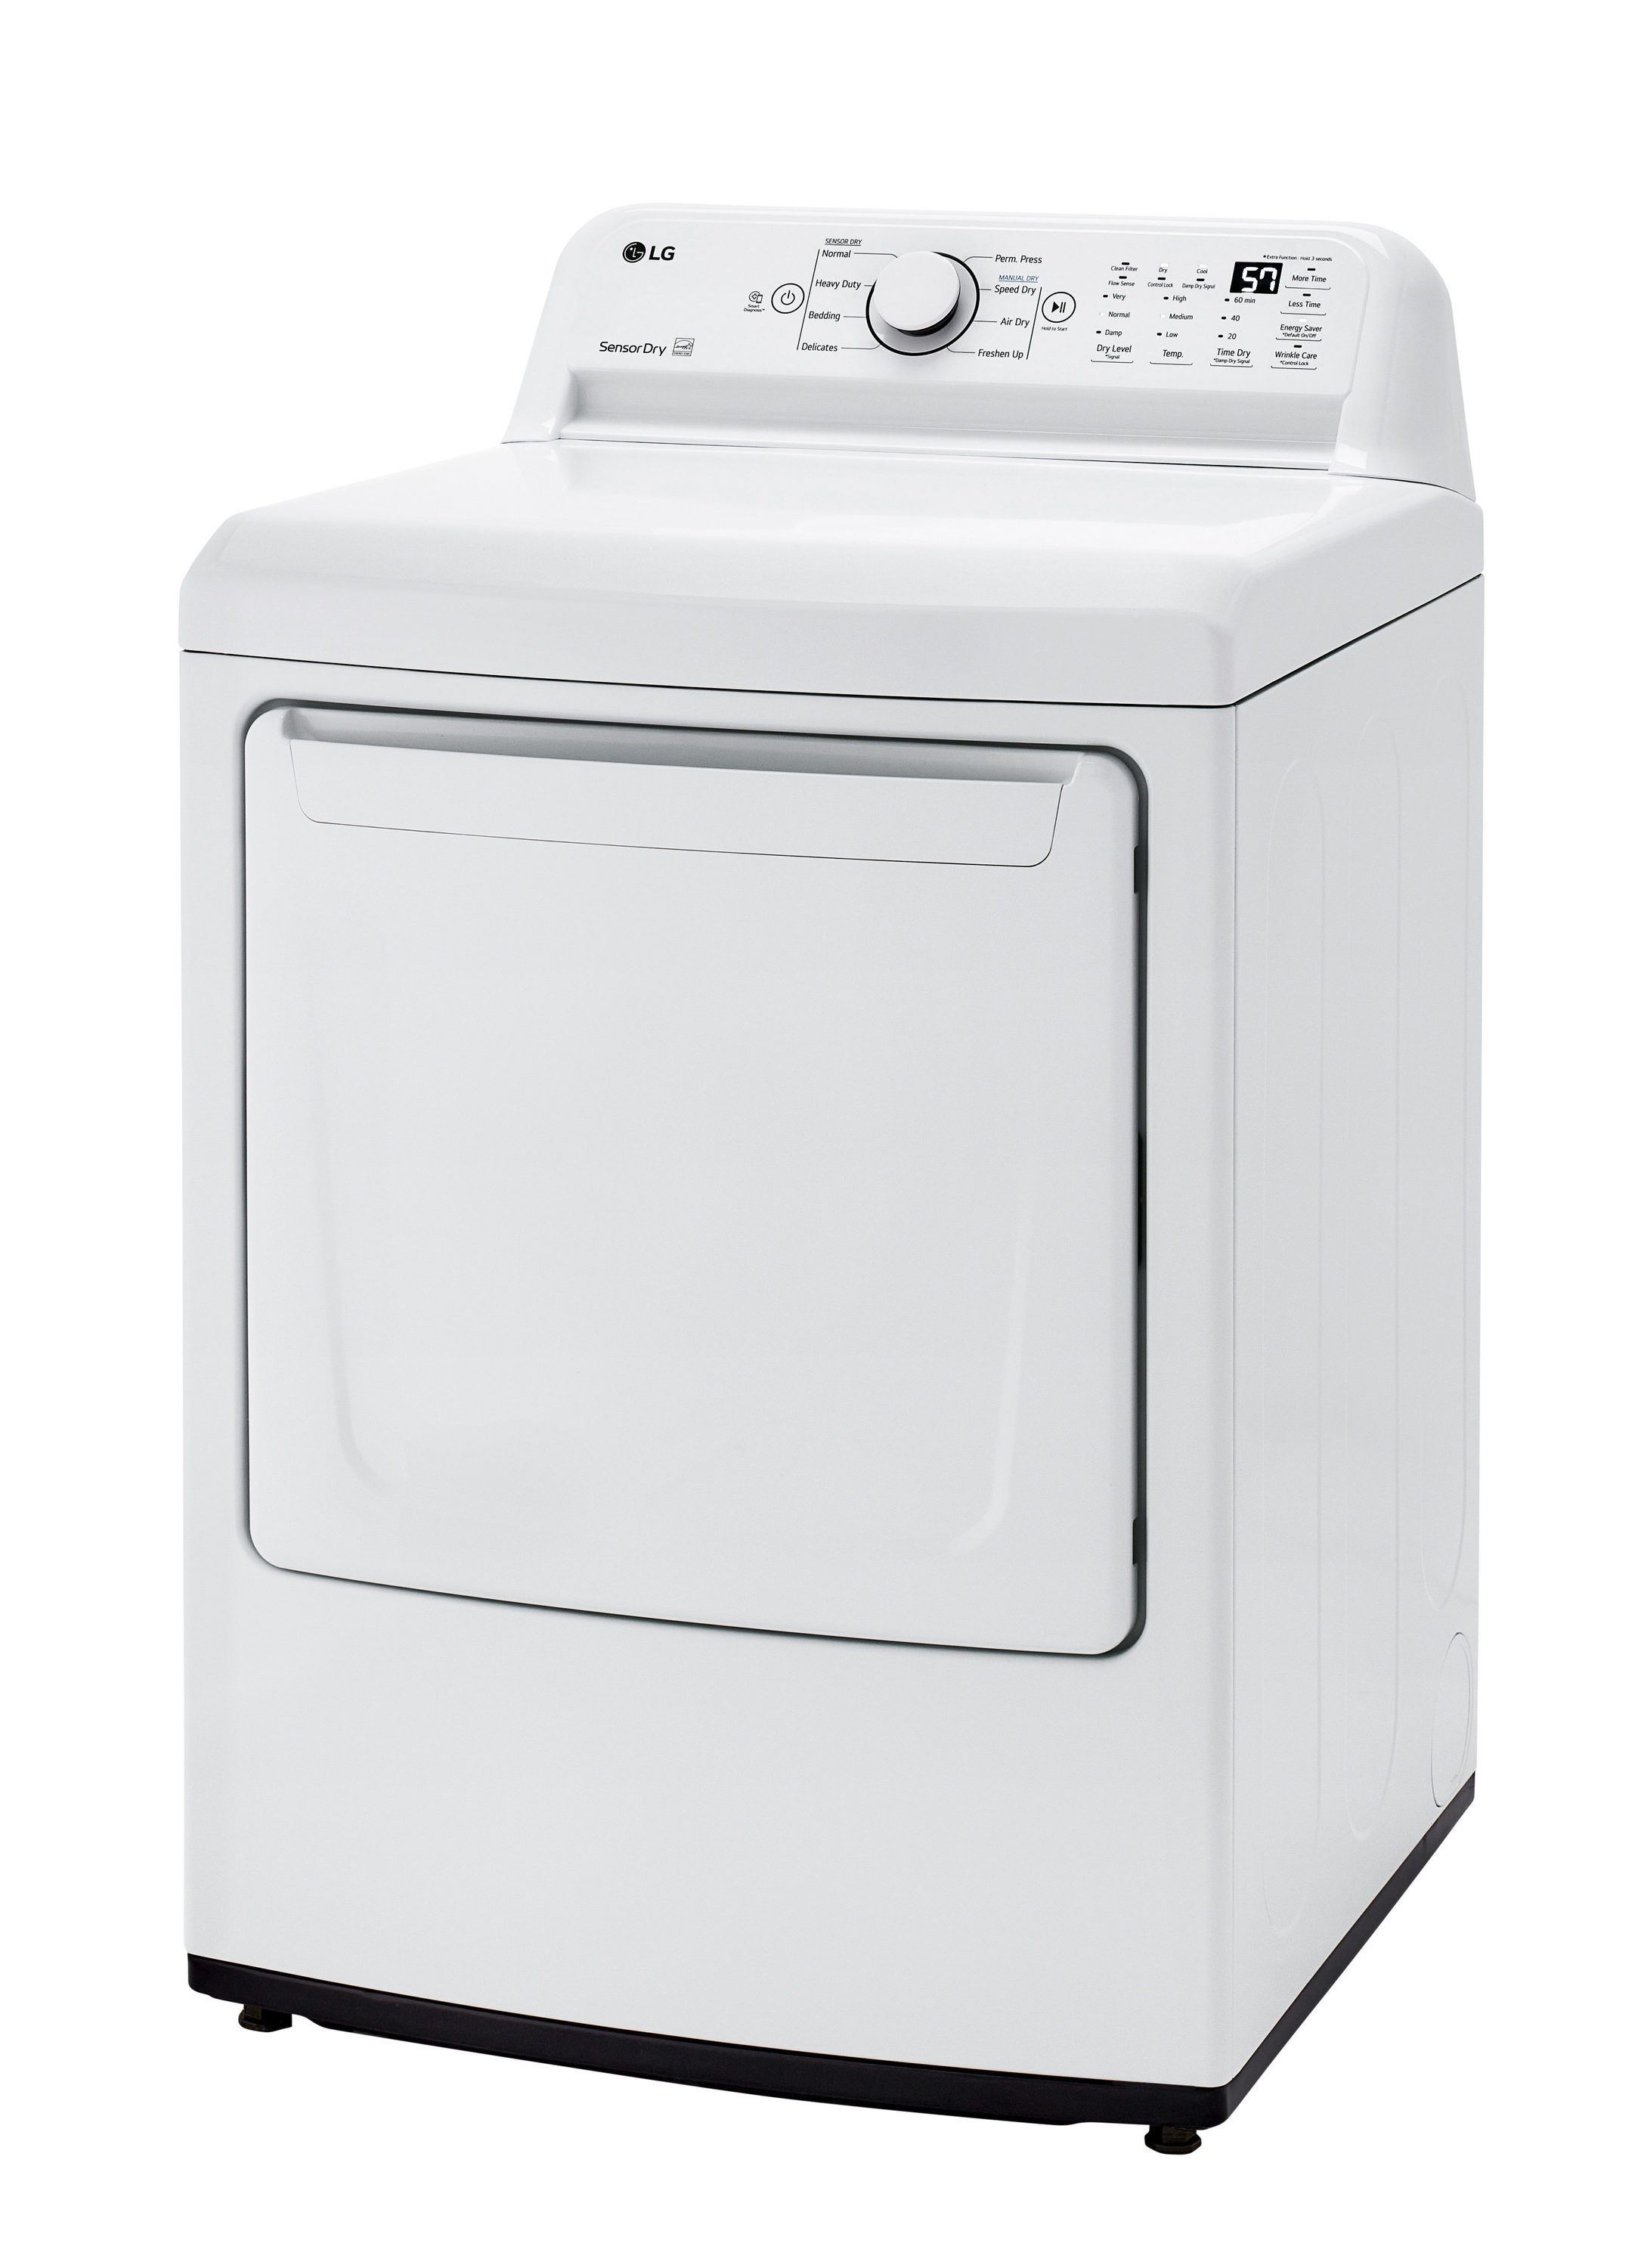 LG 7.3-cu ft Electric Dryer (White) ENERGY STAR in the Electric